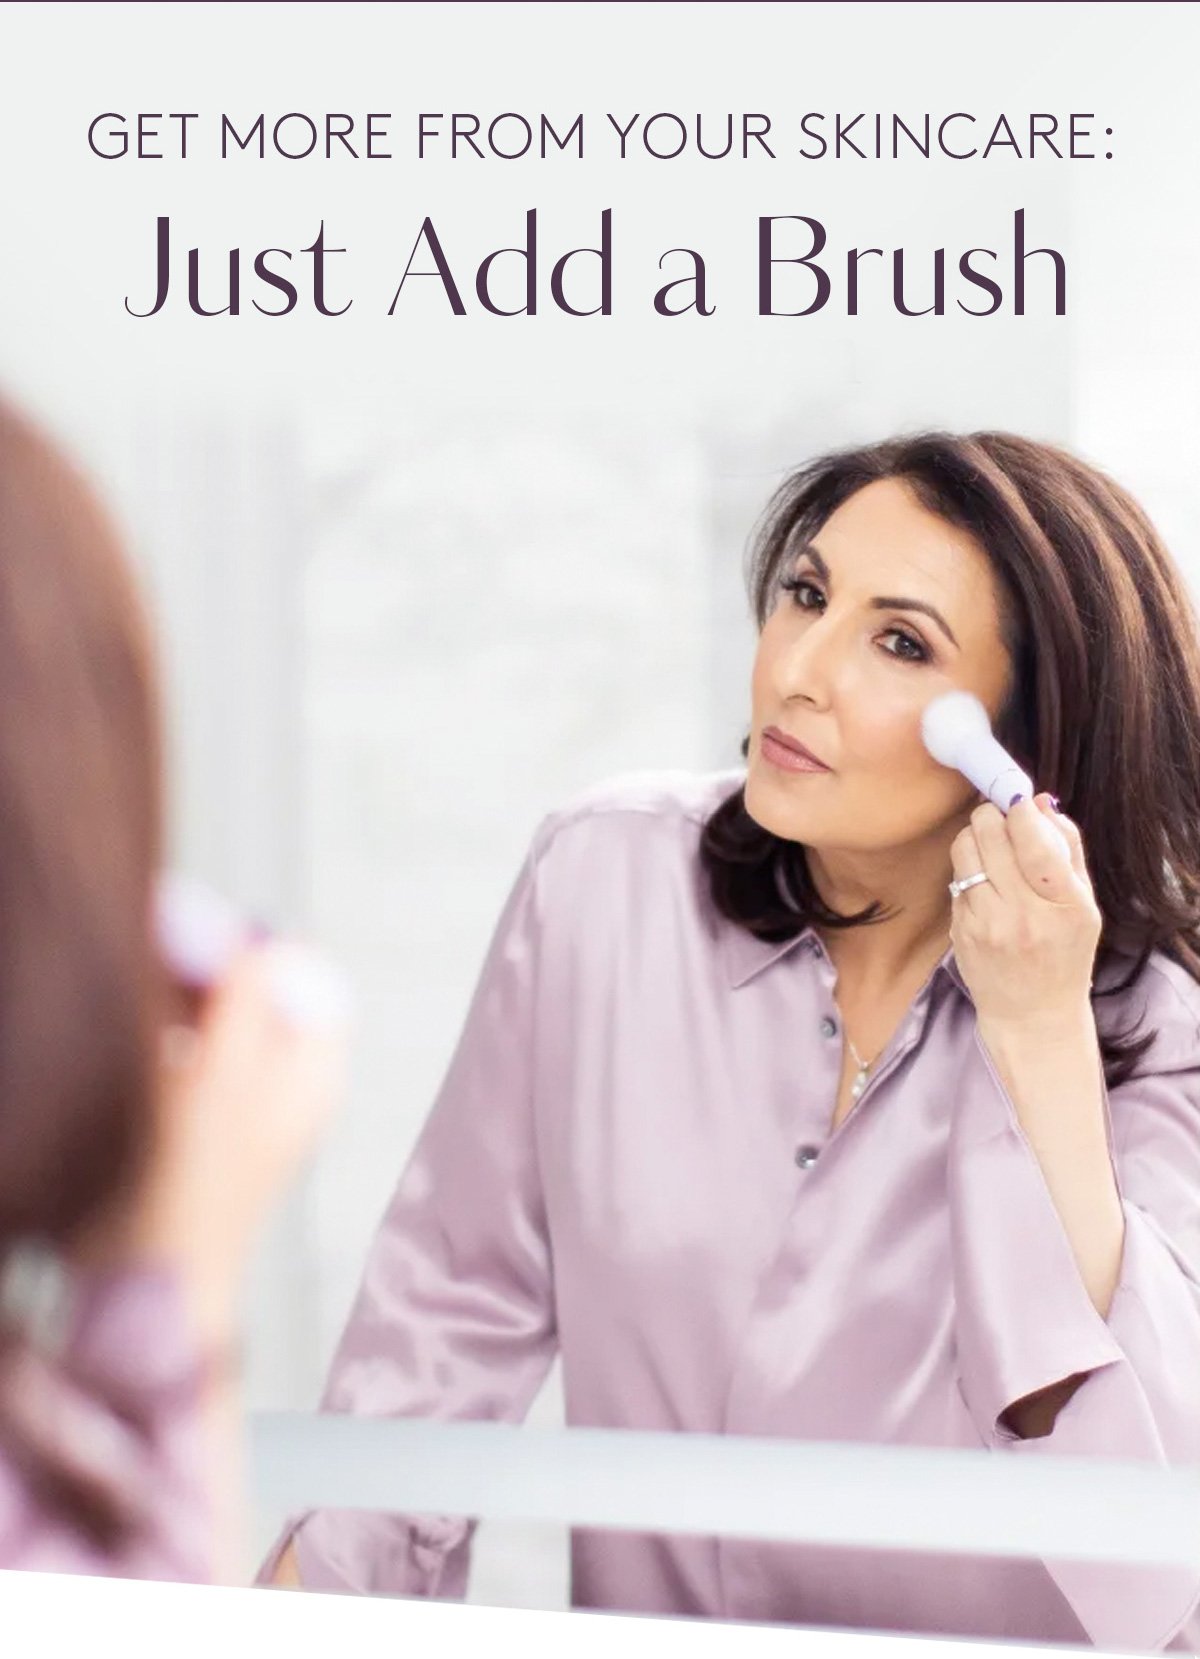 Get more from your skincare: just add a brush!